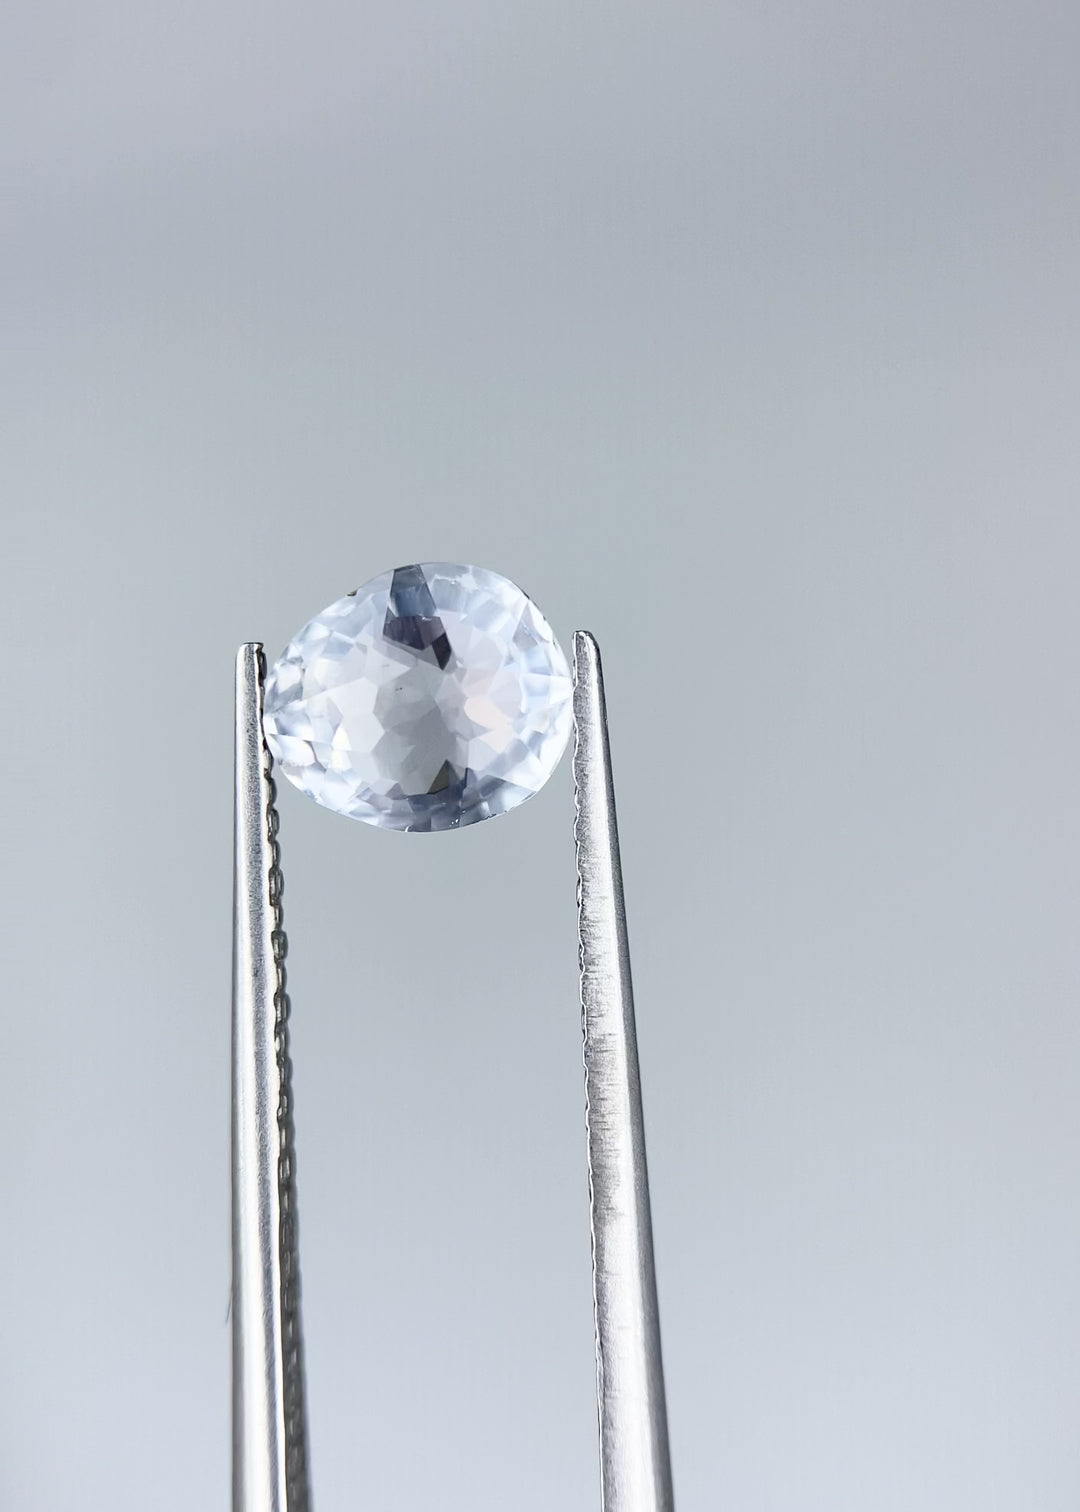 Ethereal White - 1.43ct